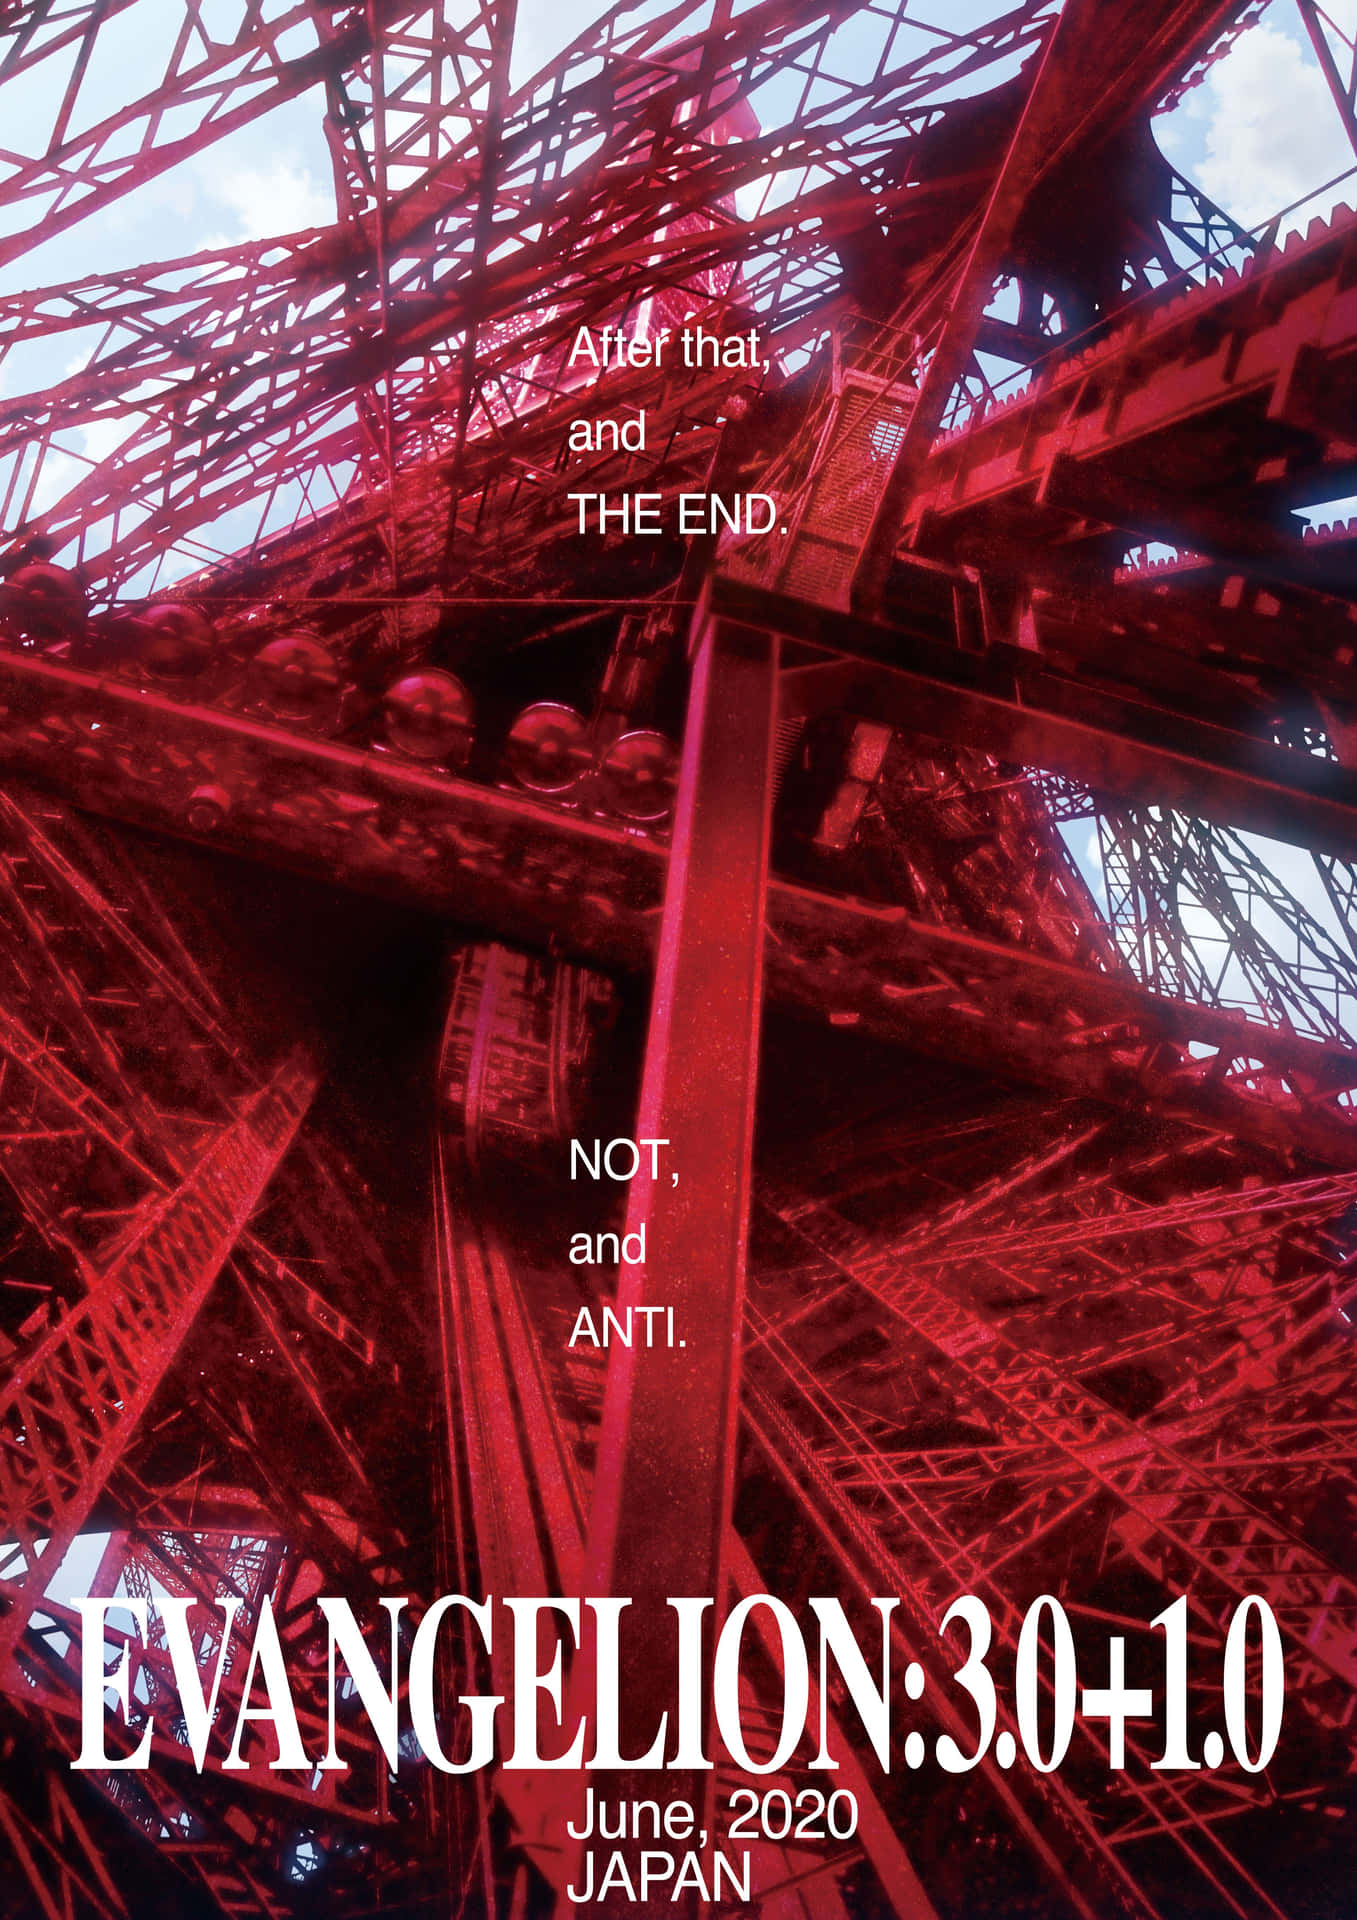 Evangelion 30 10 With A Red Tower Wallpaper